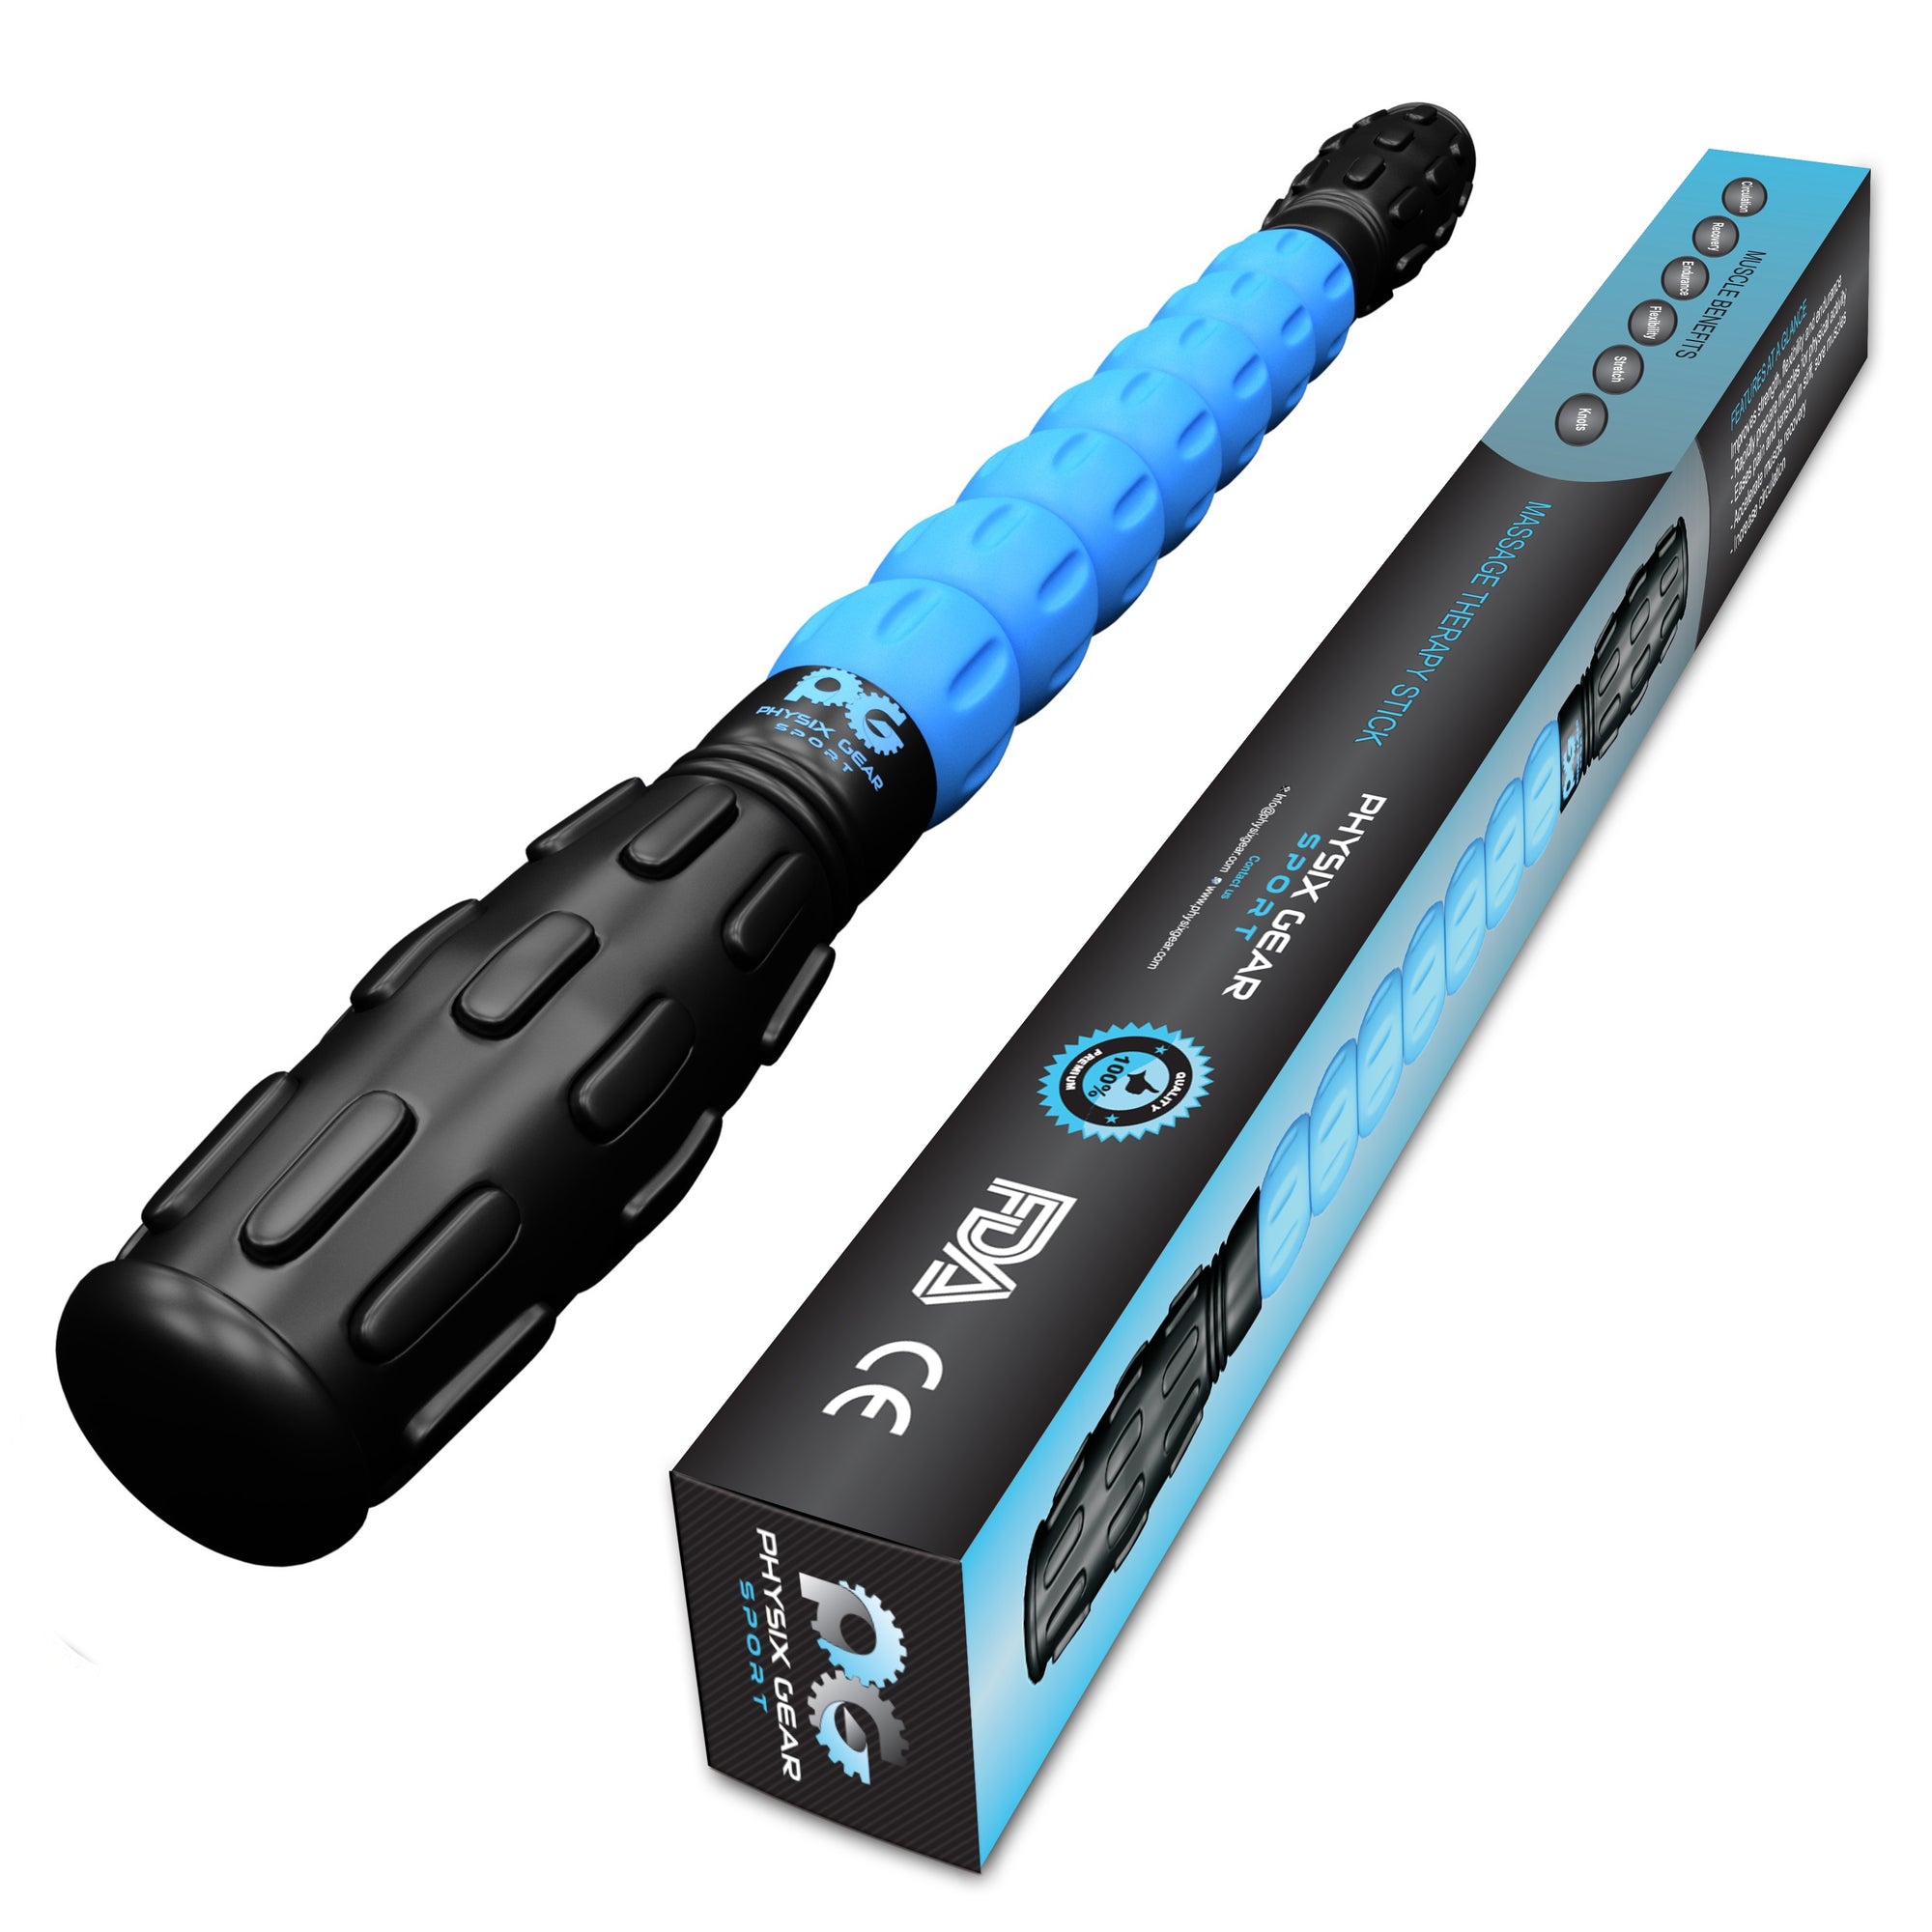 Buy Muscle Roller Sticks for sore muscles - Physix Gear Sport - Best Sports  Massage Tool for Sore Muscles, Releasing Cramps, Back Tightness,  Myofascial, Trigger Points Pain, Legs Lactic Acid, Knots, 